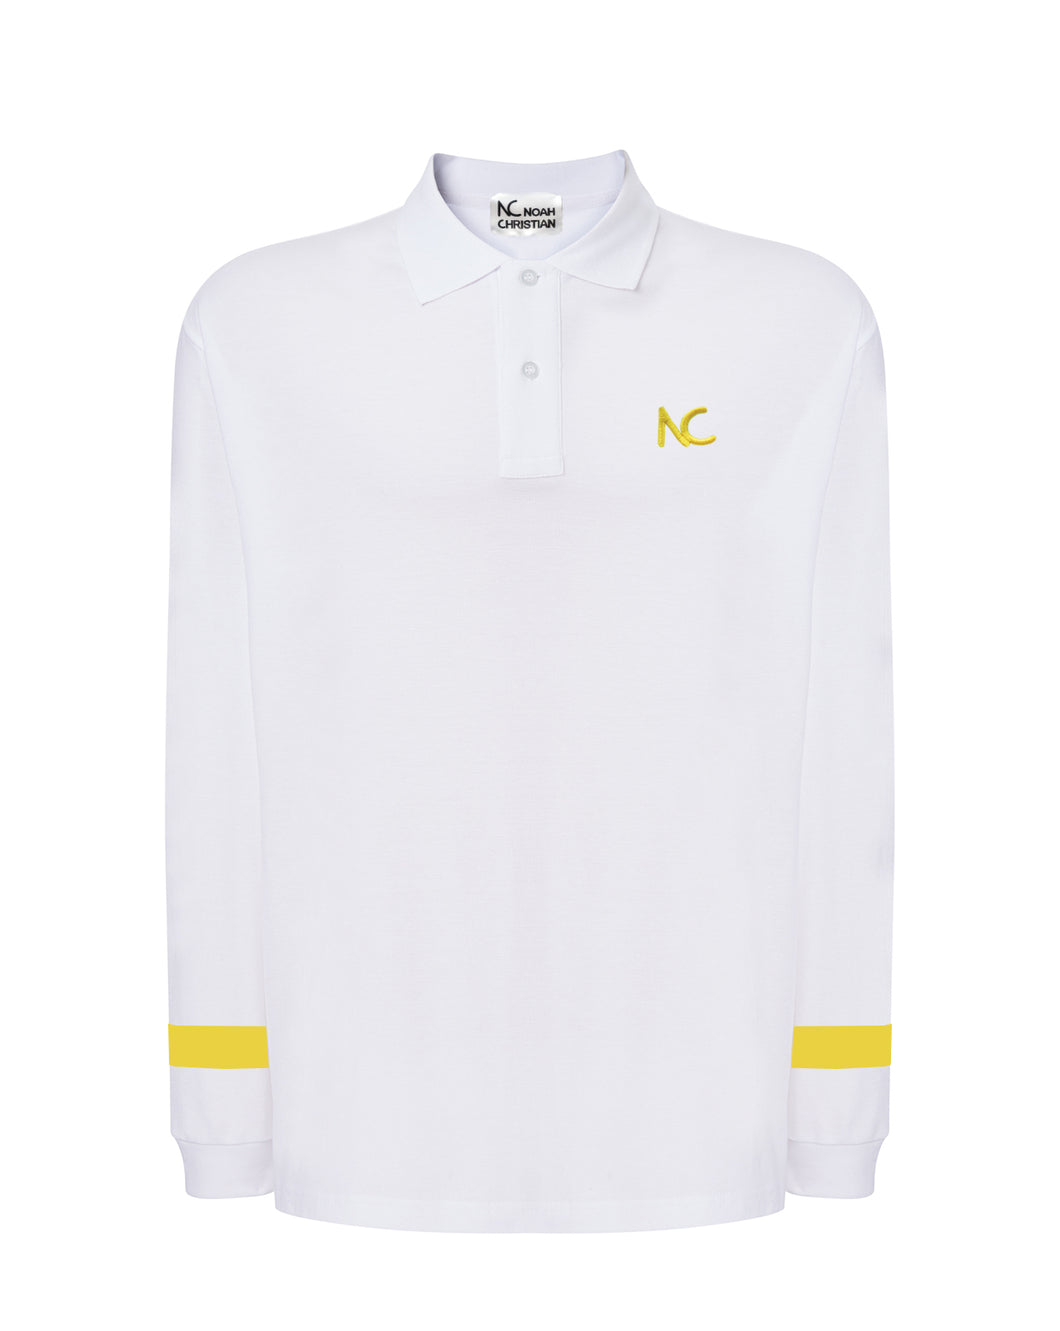 LIMITED EDITION - LONG SLEEVE POLO CLASSIC FIT - WHITE/YELLOW